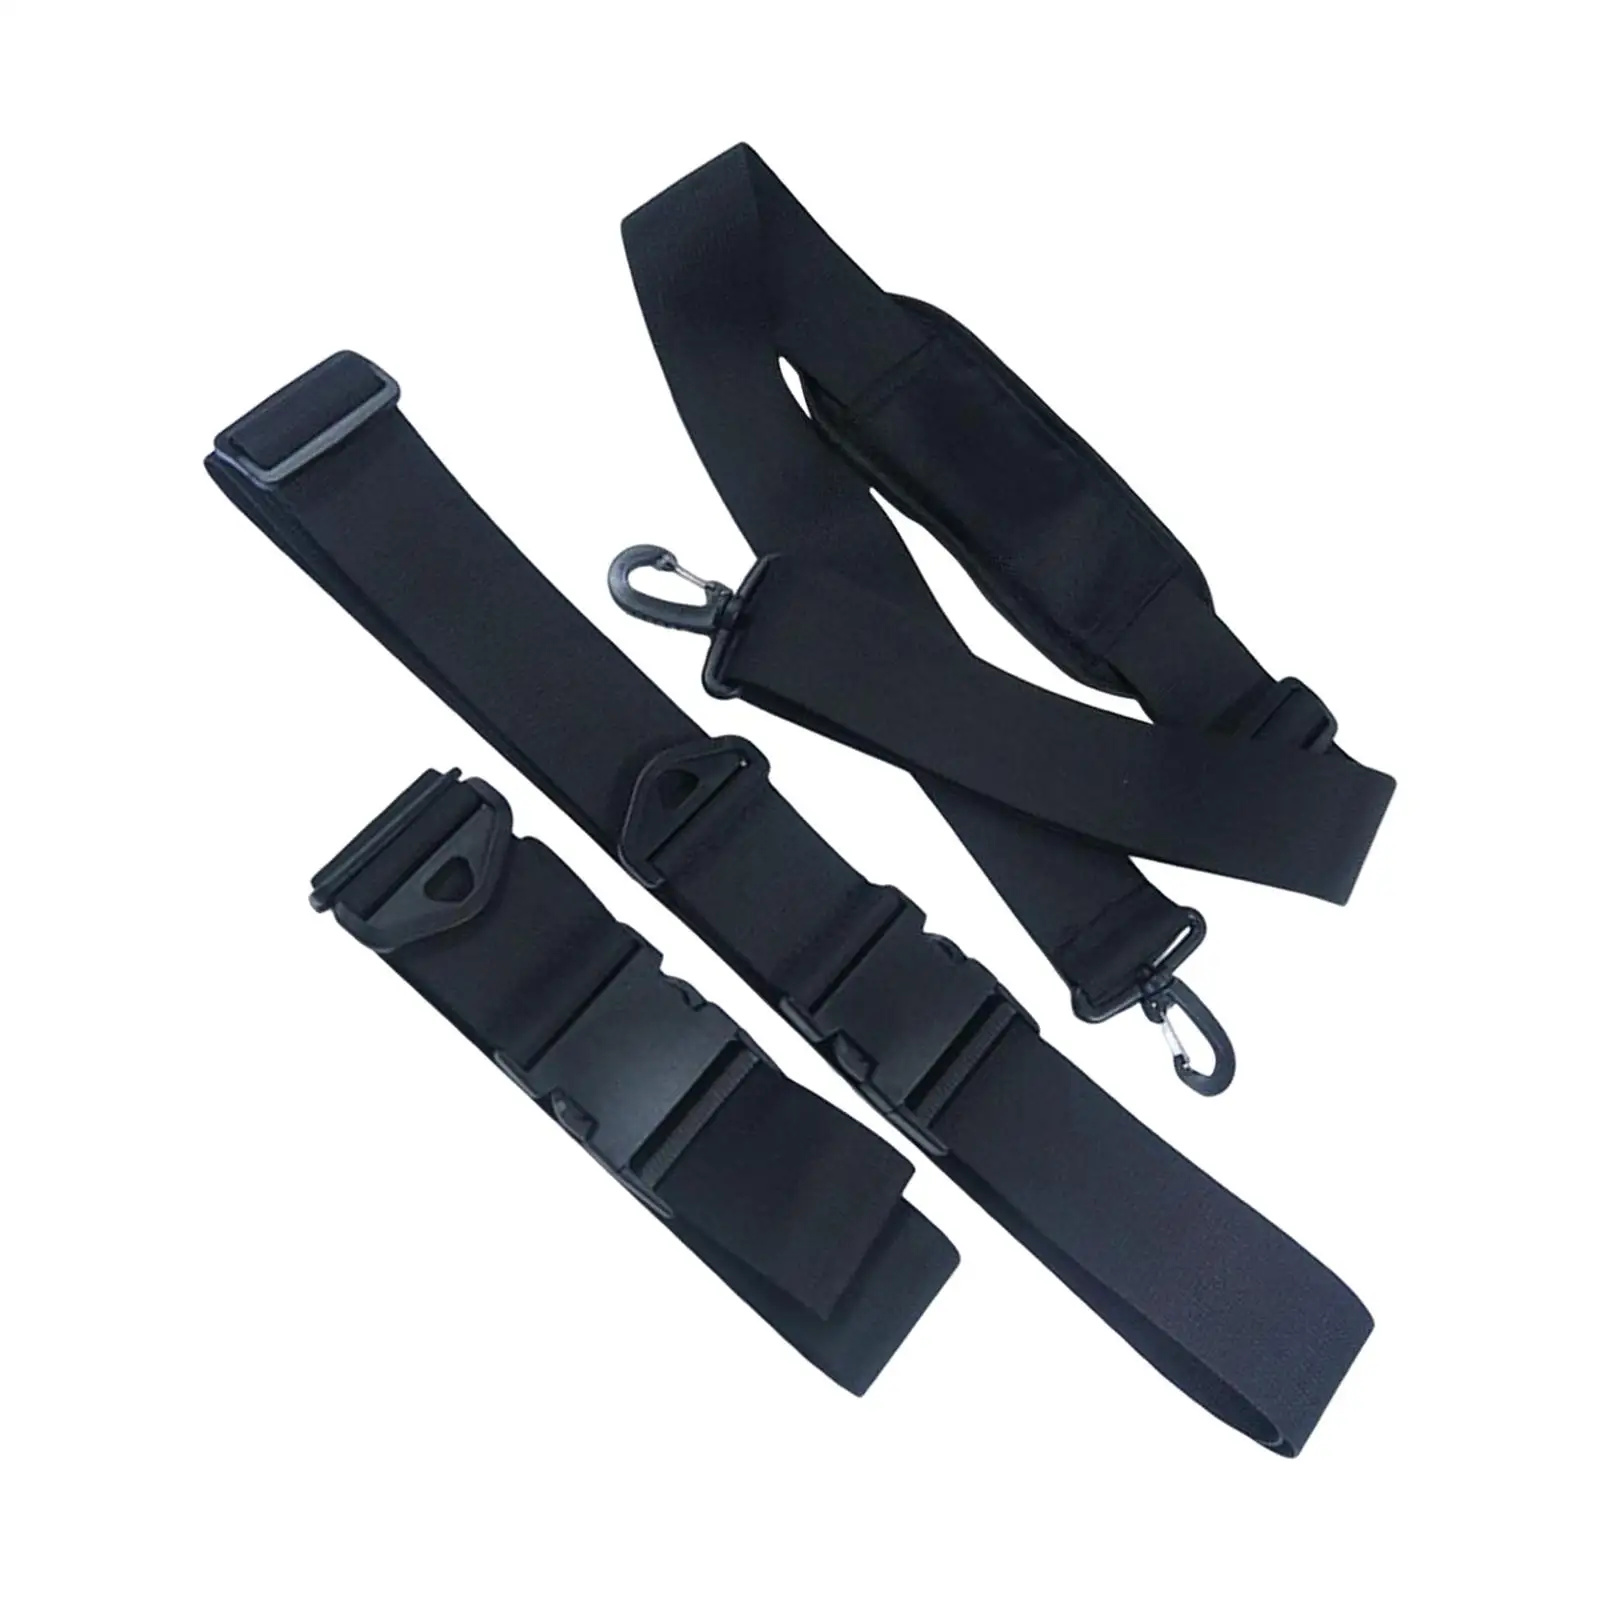 Carrying Sling Carrier Outdoor with Metal Hooks Paddle Board Shoulder Strap